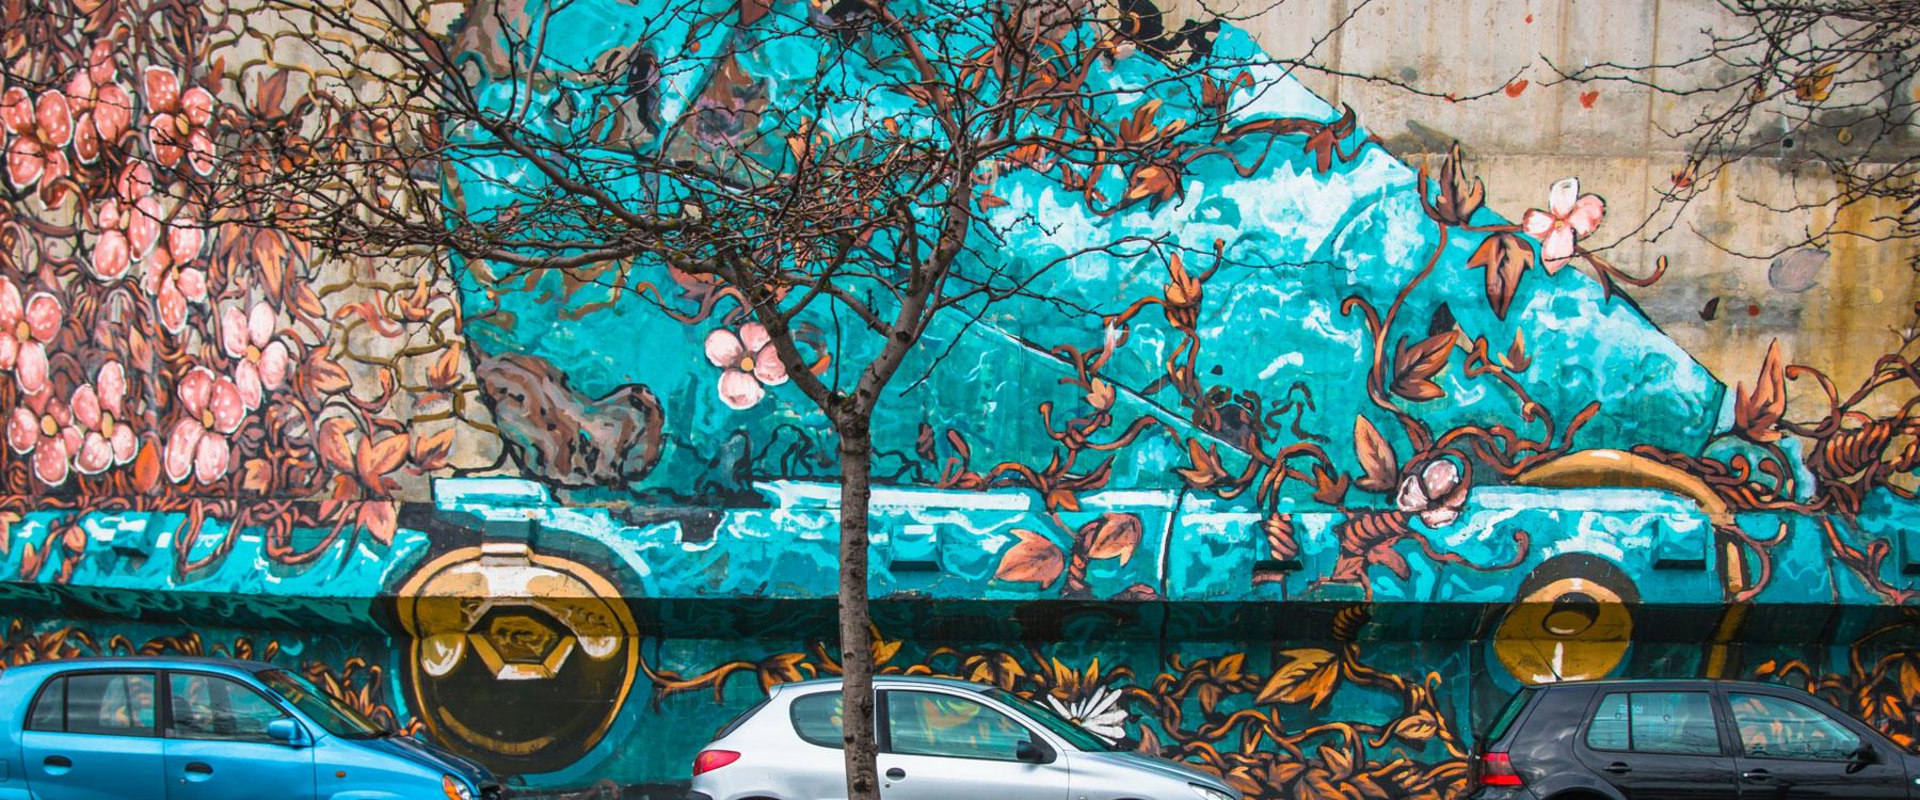 Where is the best street art in the world?